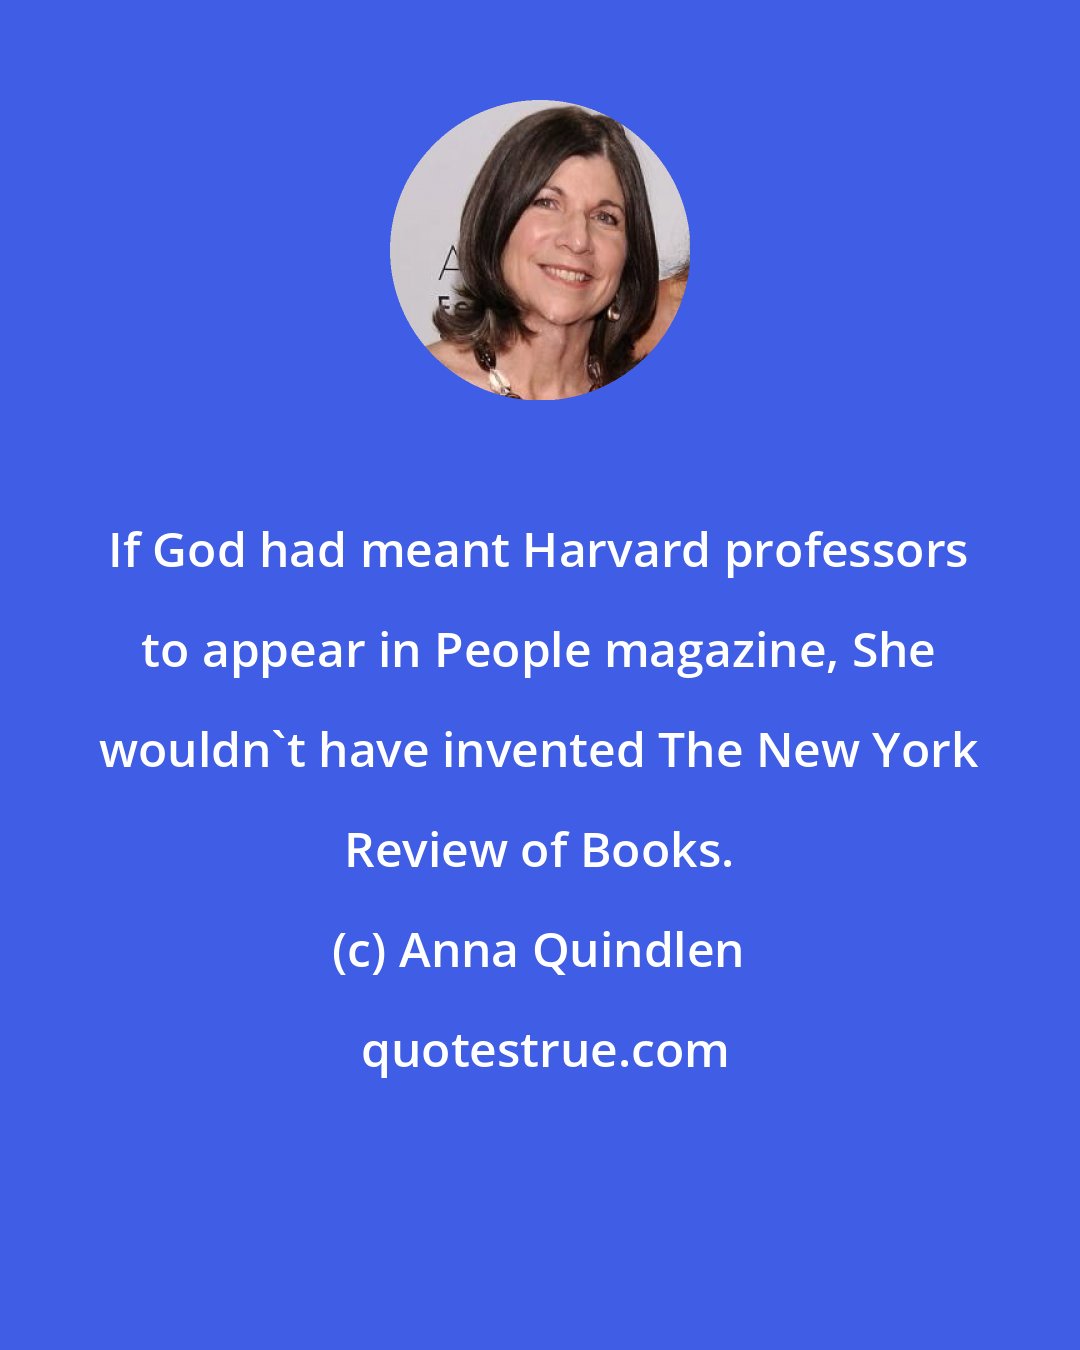 Anna Quindlen: If God had meant Harvard professors to appear in People magazine, She wouldn't have invented The New York Review of Books.